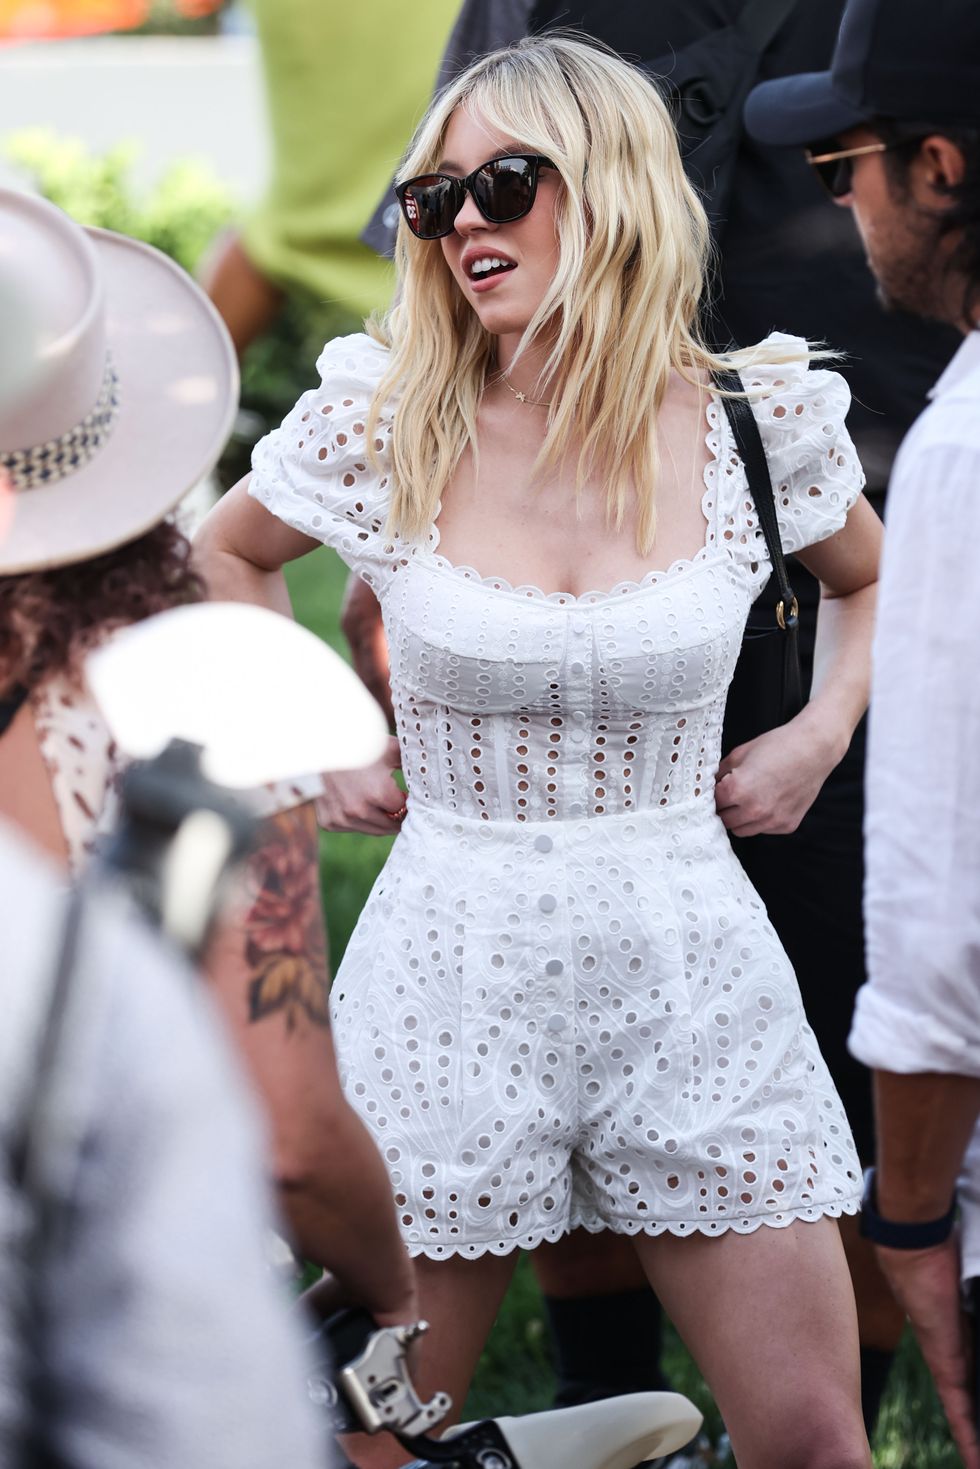 See Every Celebrity Outfit at Coachella 2022